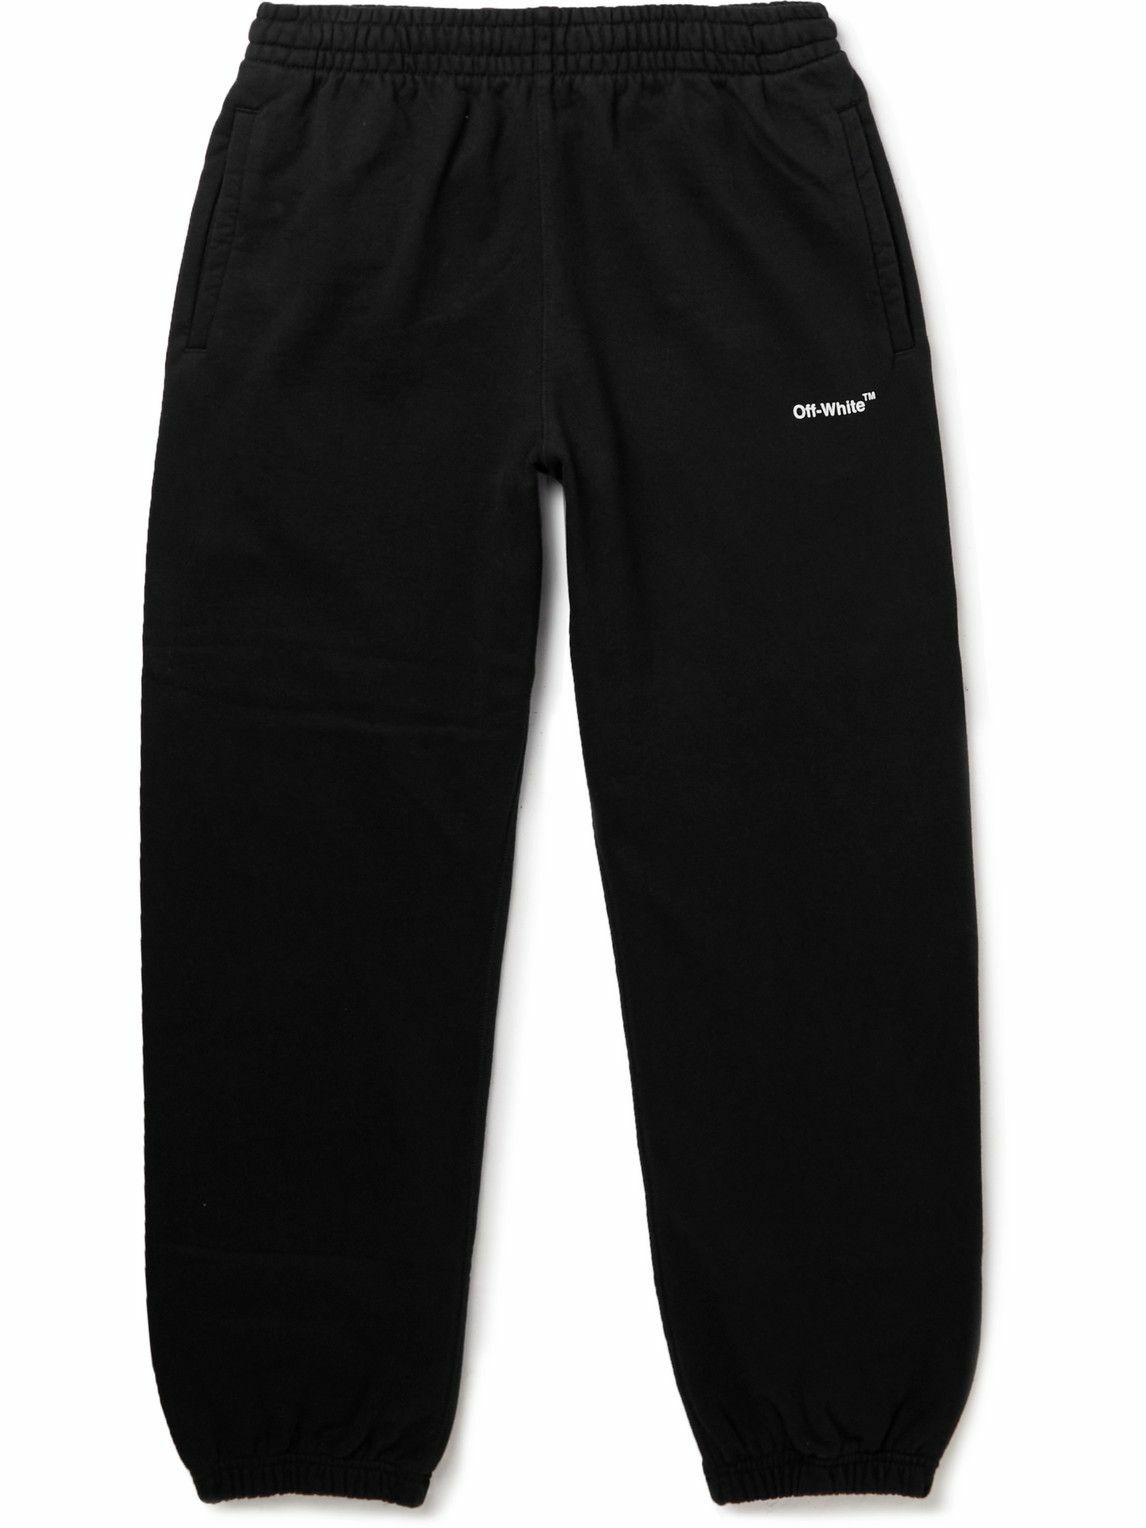 Off-White - Tapered Logo-Print Cotton-Jersey Sweatpants - Black Off-White